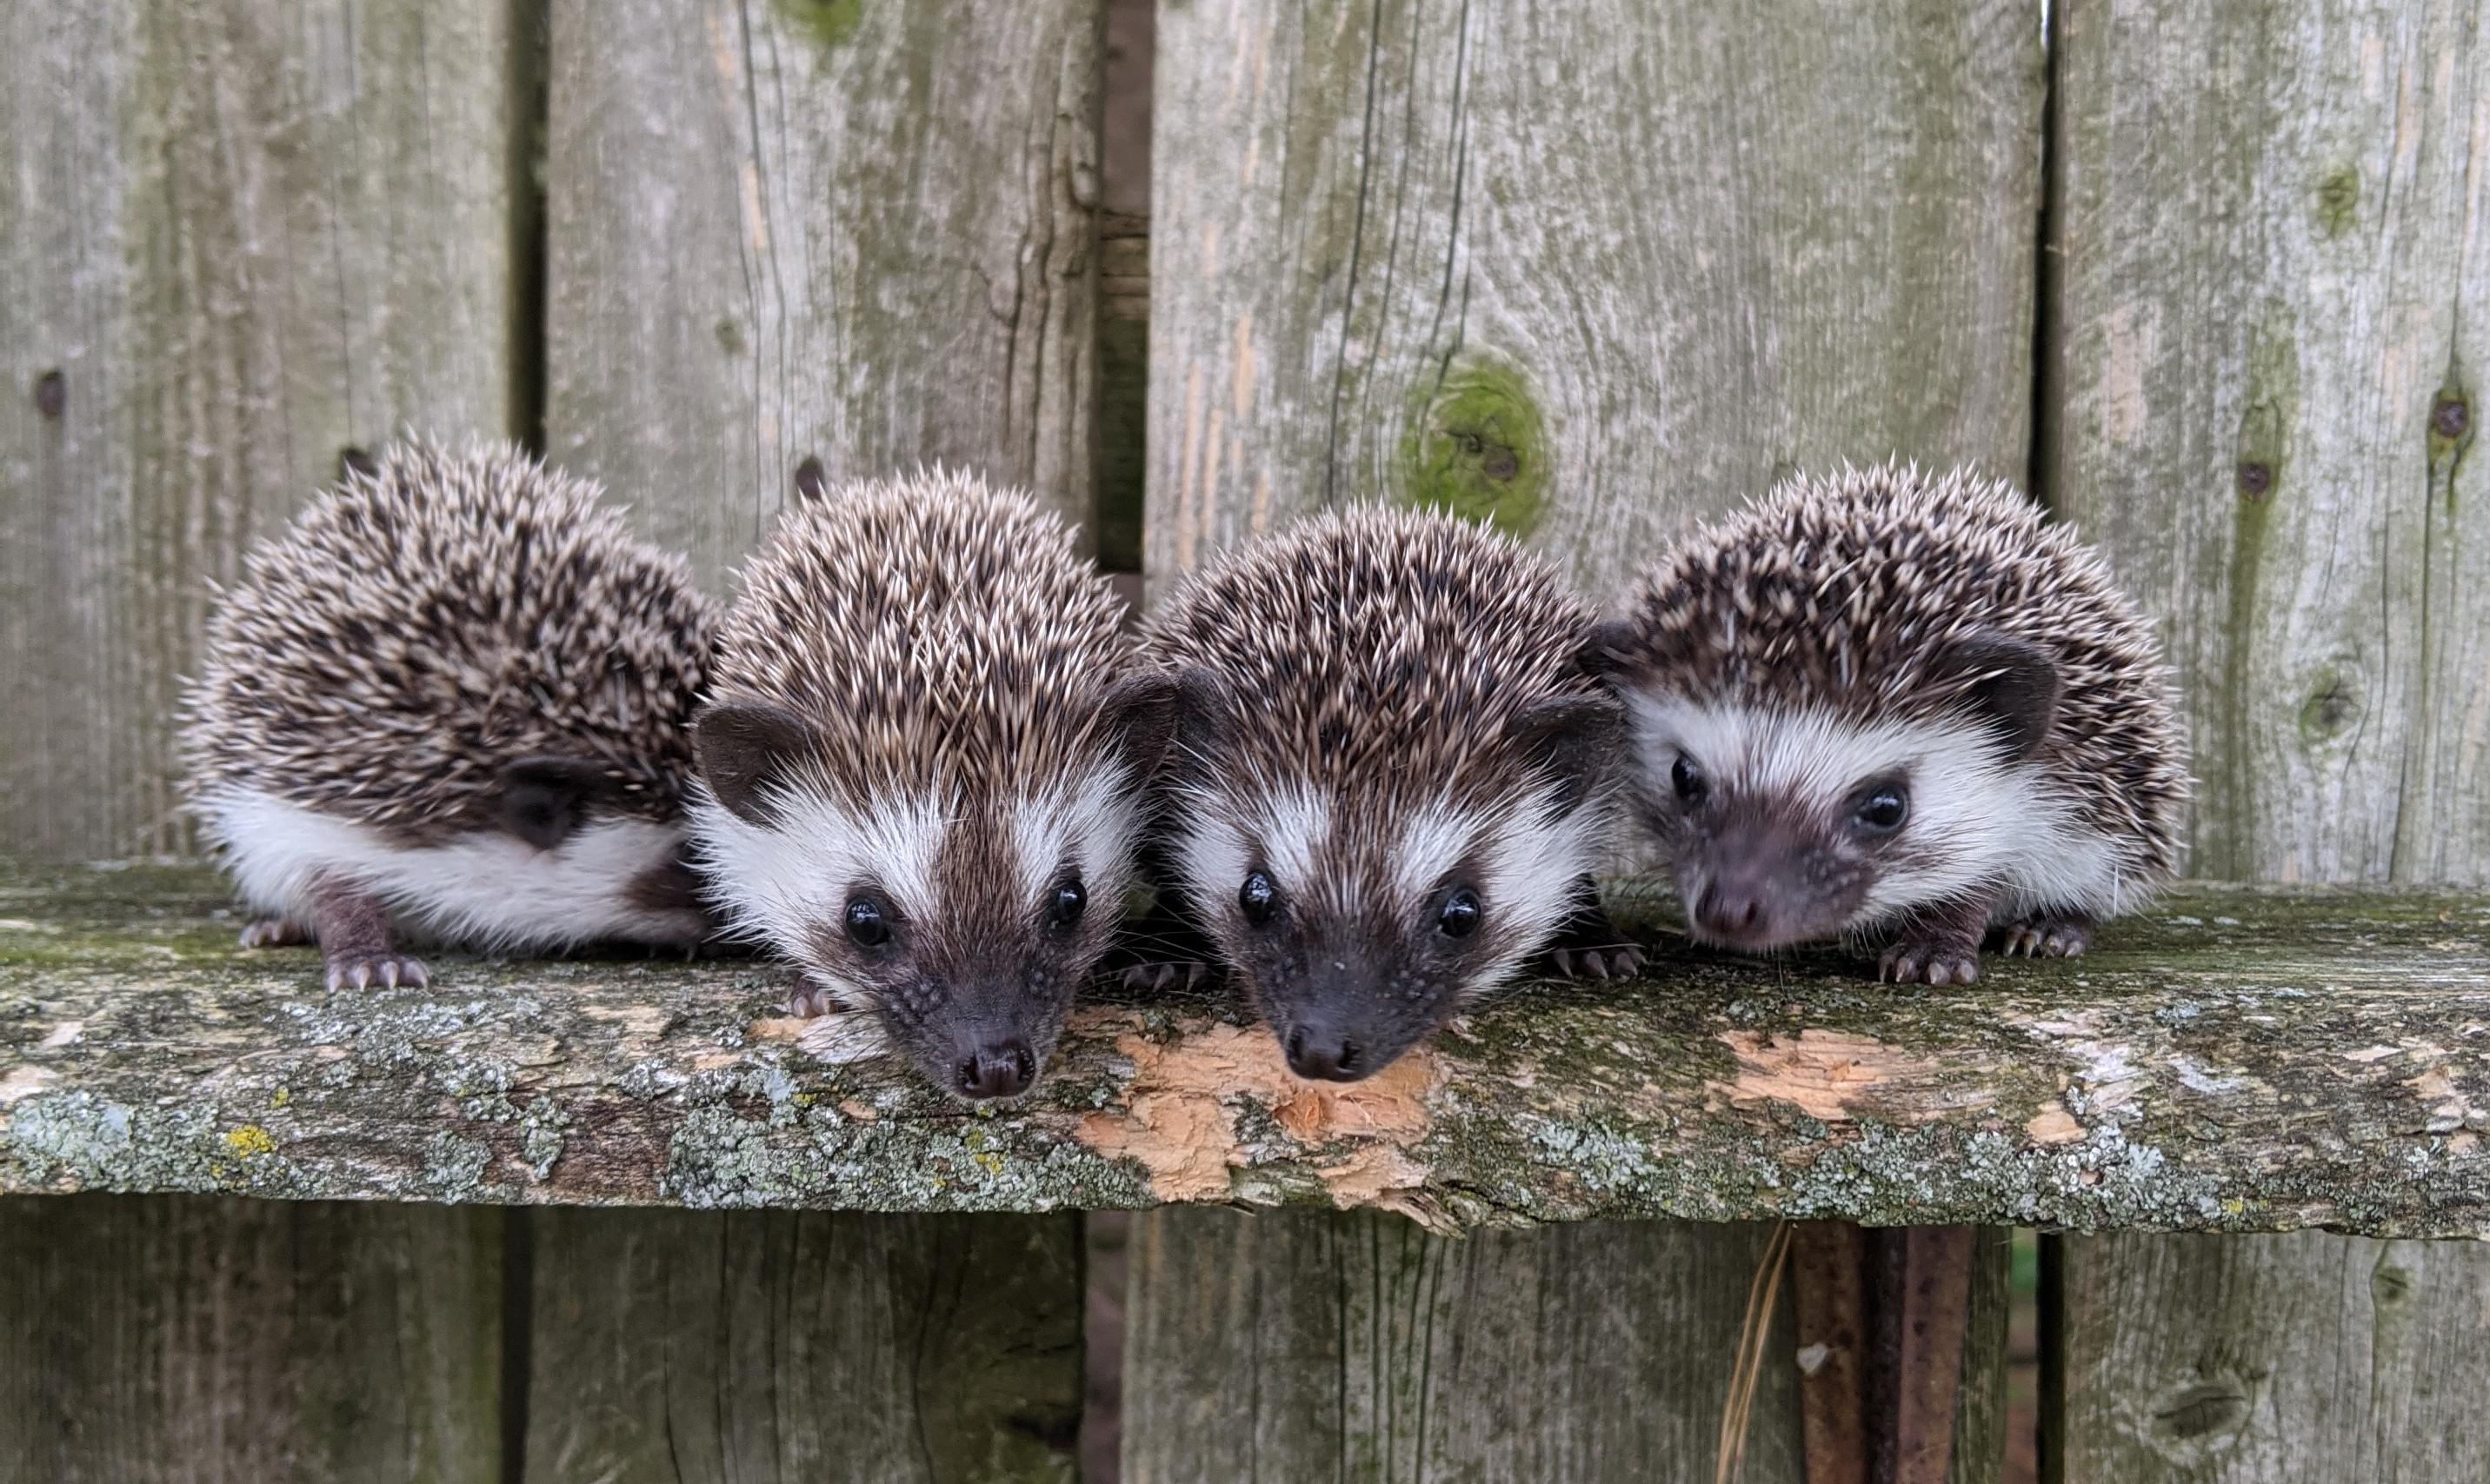 Is a group of hedgehogs called a prickle or array?